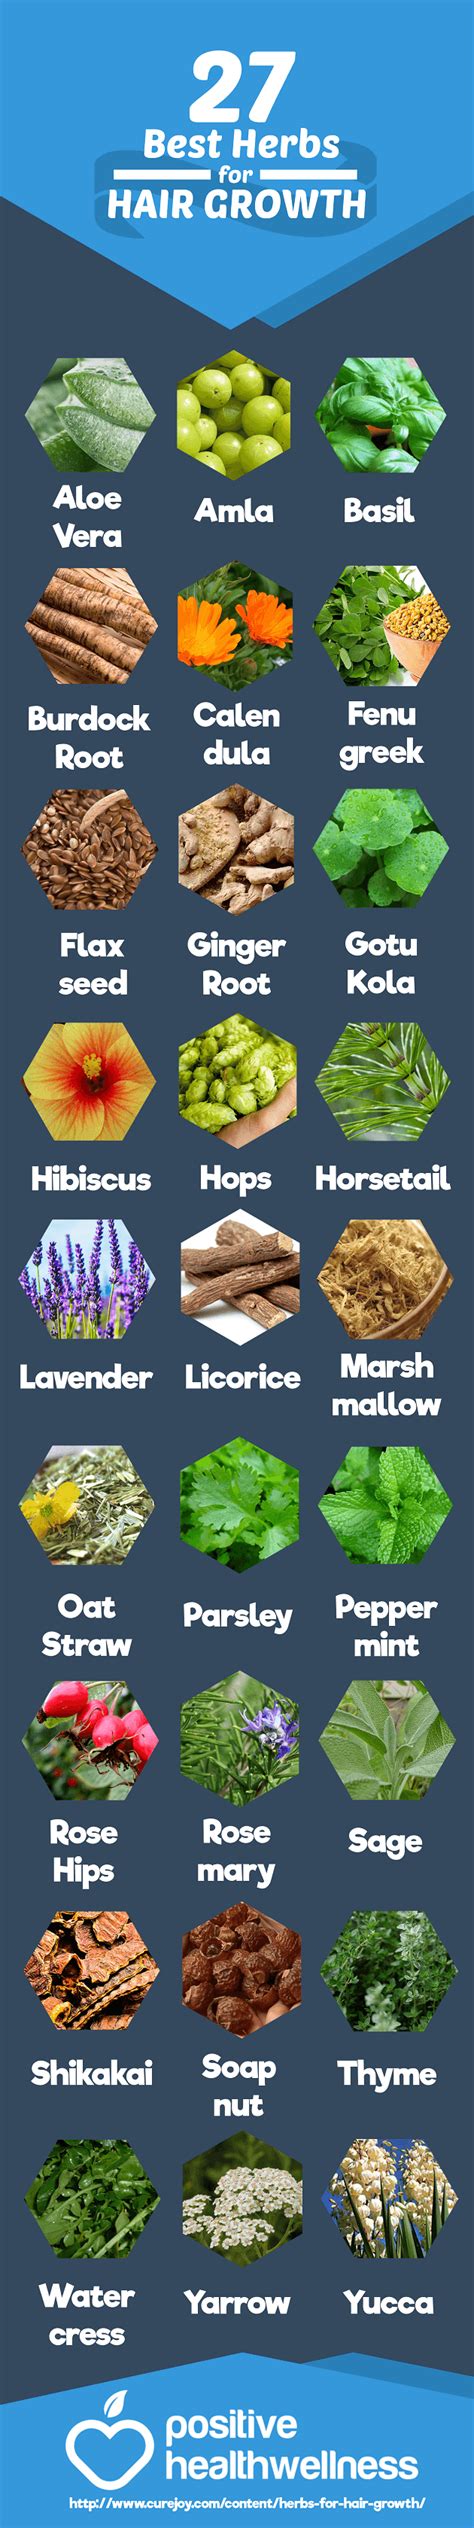 27 Best Herbs For Hair Growth Infographic